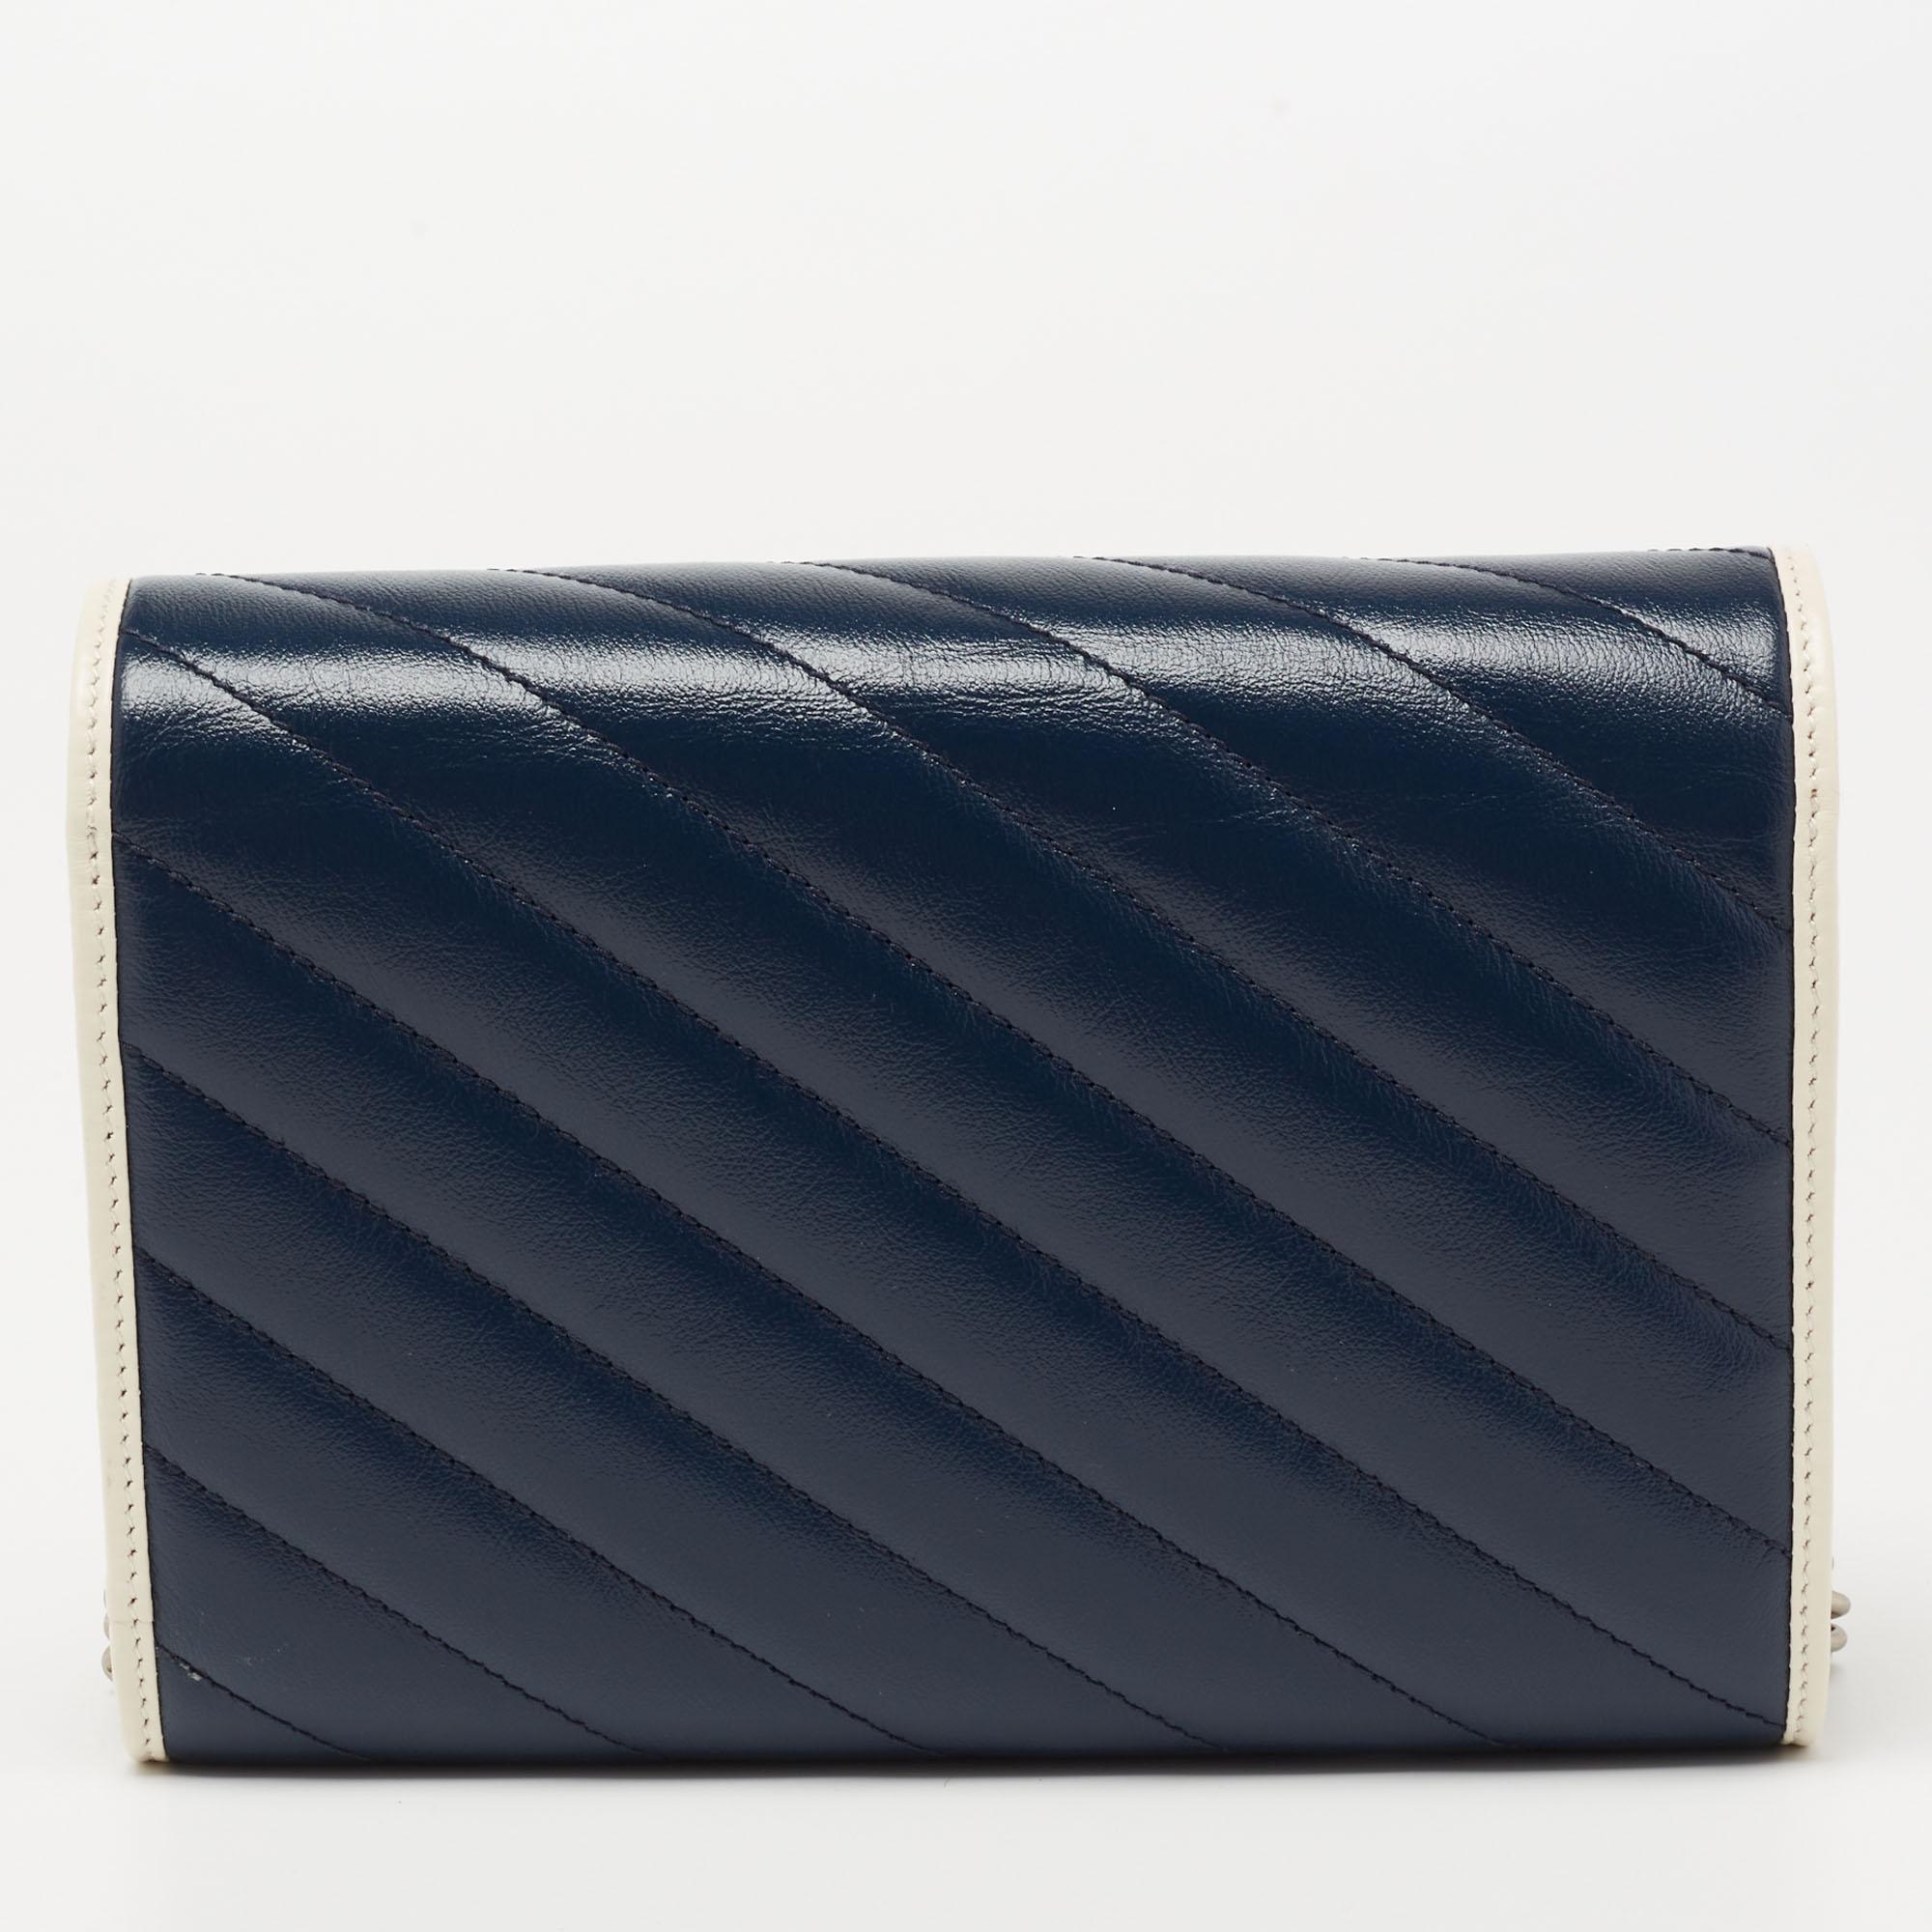 This blue/white GG Marmont Torchon WOC is crafted from quilt leather and equipped with a lined interior. The bag is adorned with a textured GG logo on the flap and attached with a shoulder chain.

Includes: Original Dustbag, Original Box, Info